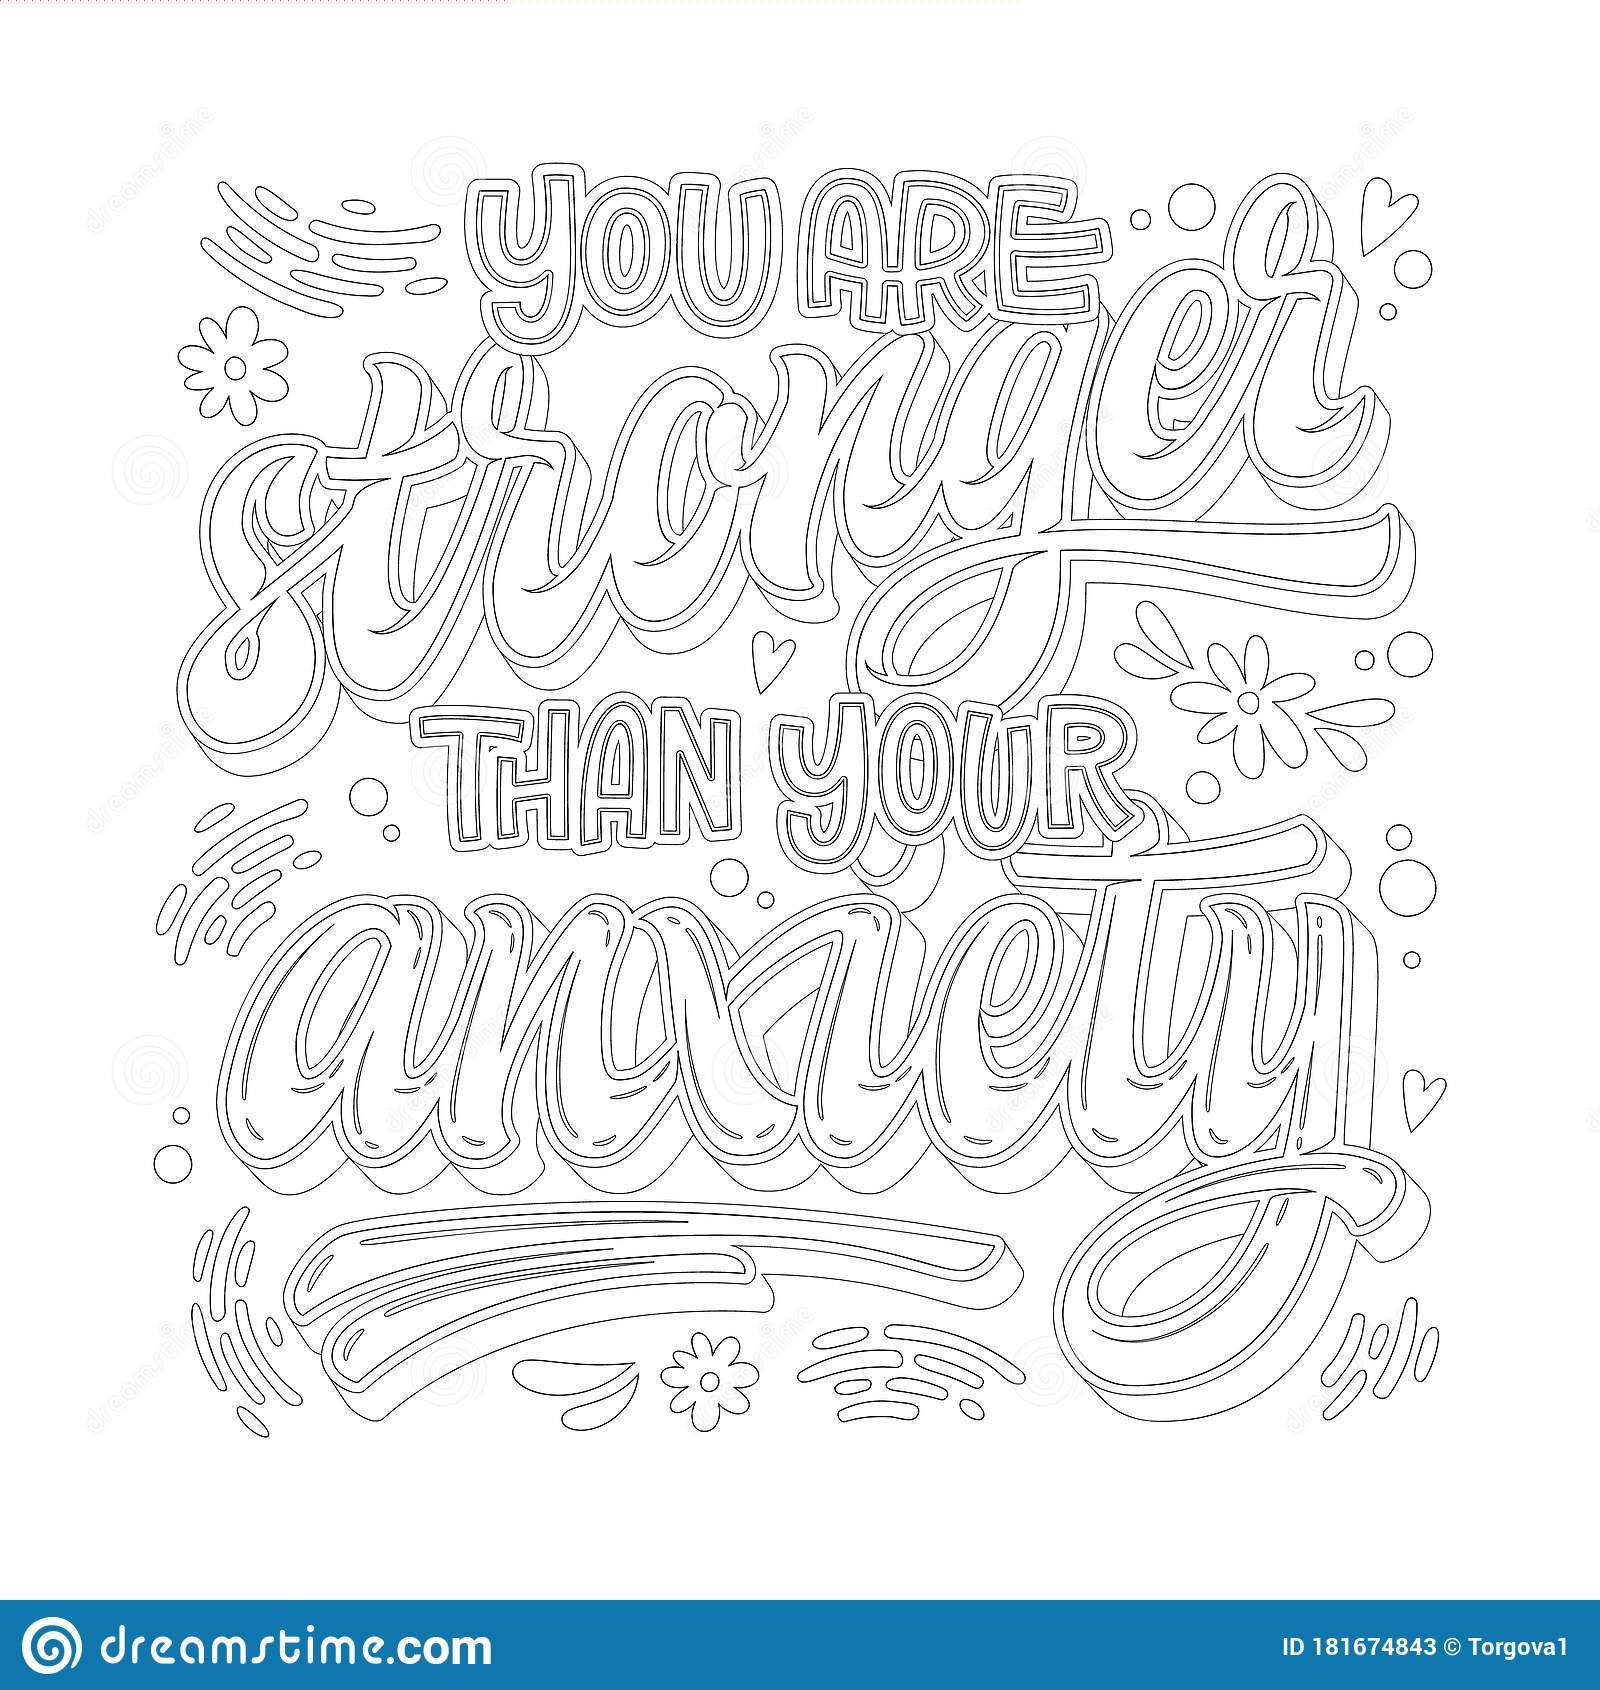 20 Printable Coloring Pages for Anxiety Reduction   Happier Human